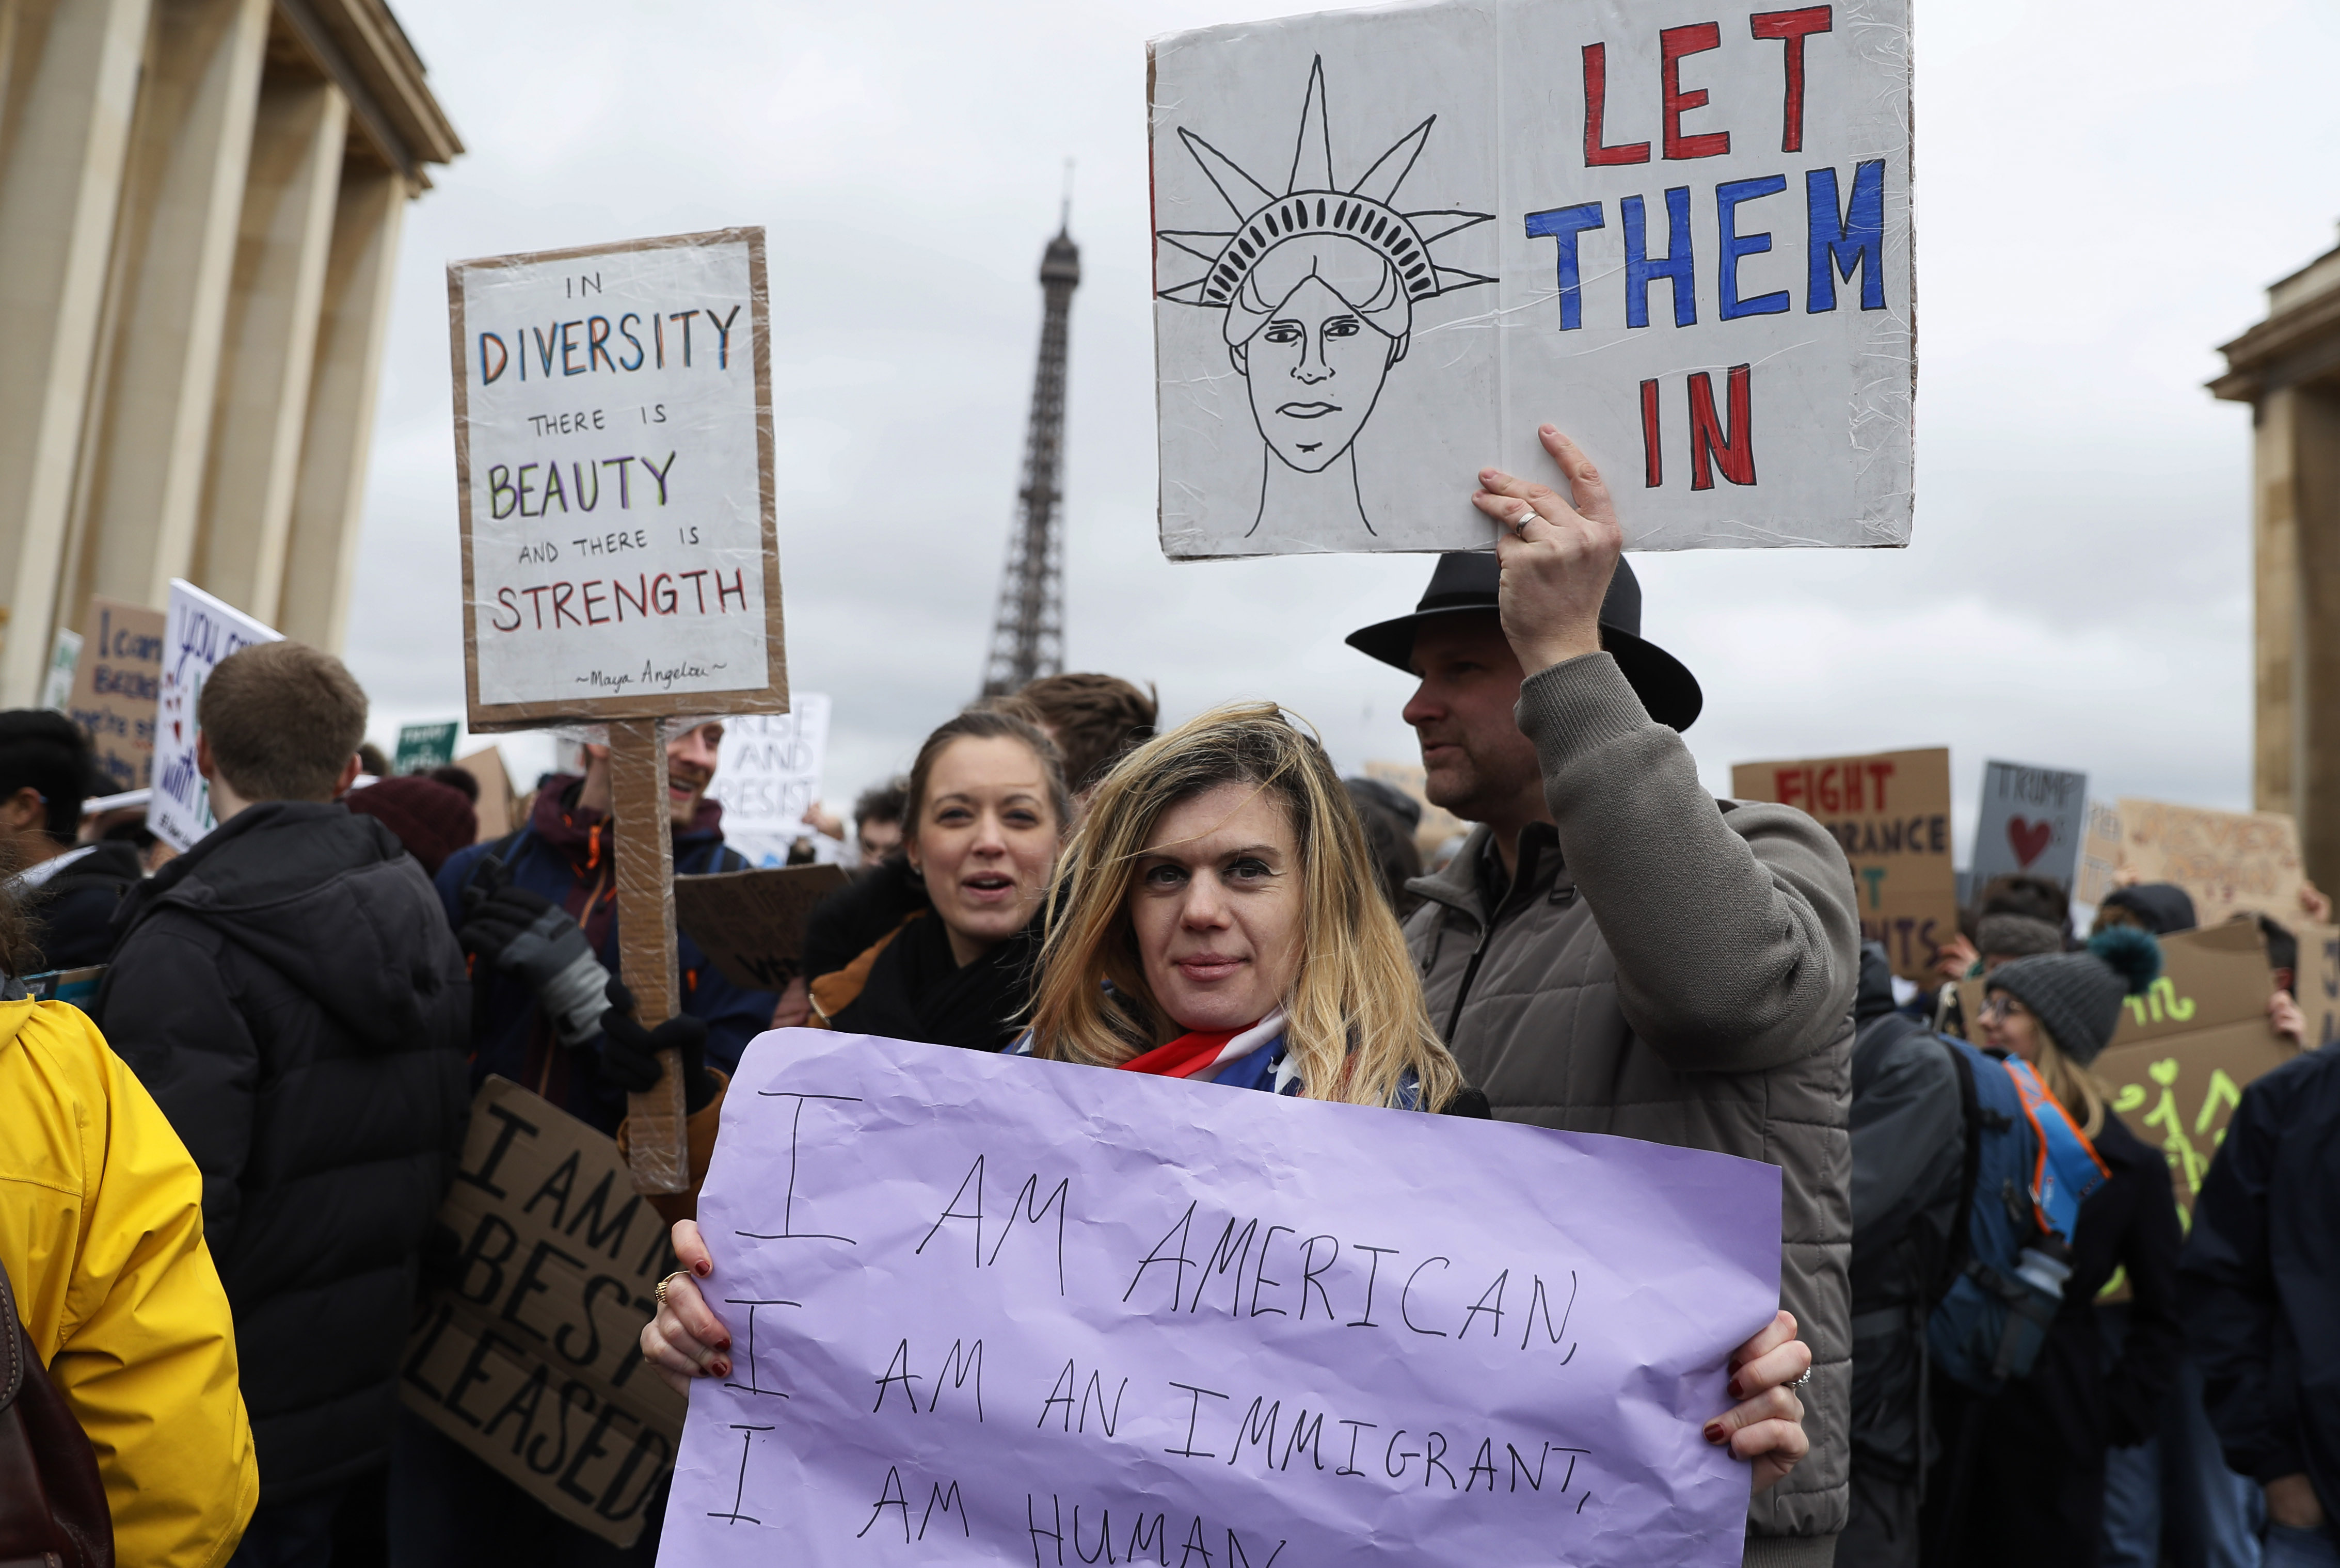 An anti-Trump protester holds a sign during a demonstration in front of the Eiffel Tower in Paris, on February 4, 2017. (THOMAS SAMSON/AFP/Getty Images)